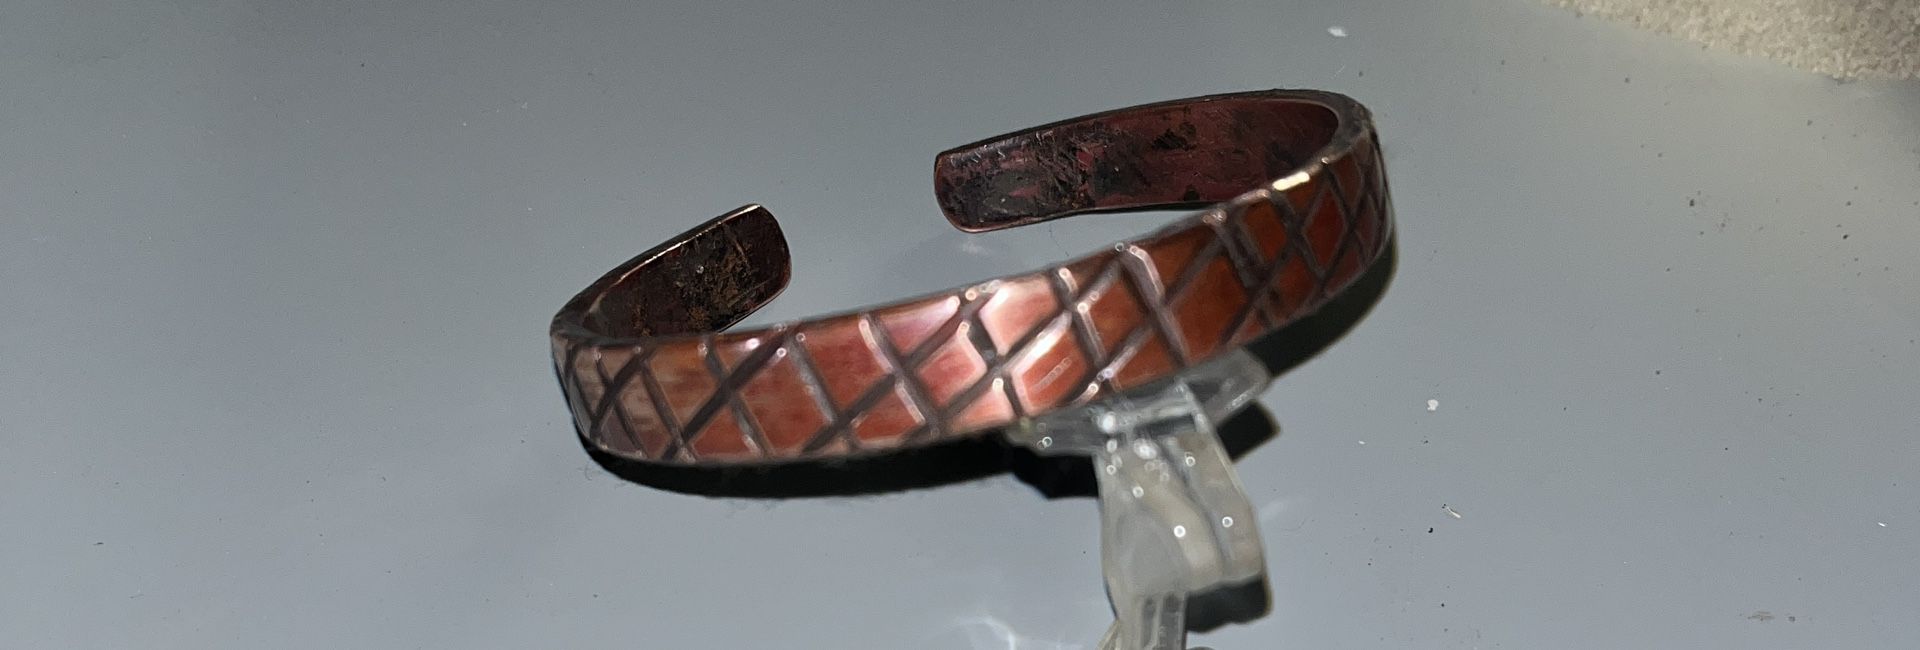 Solid Copper Bracelet Made Locally 